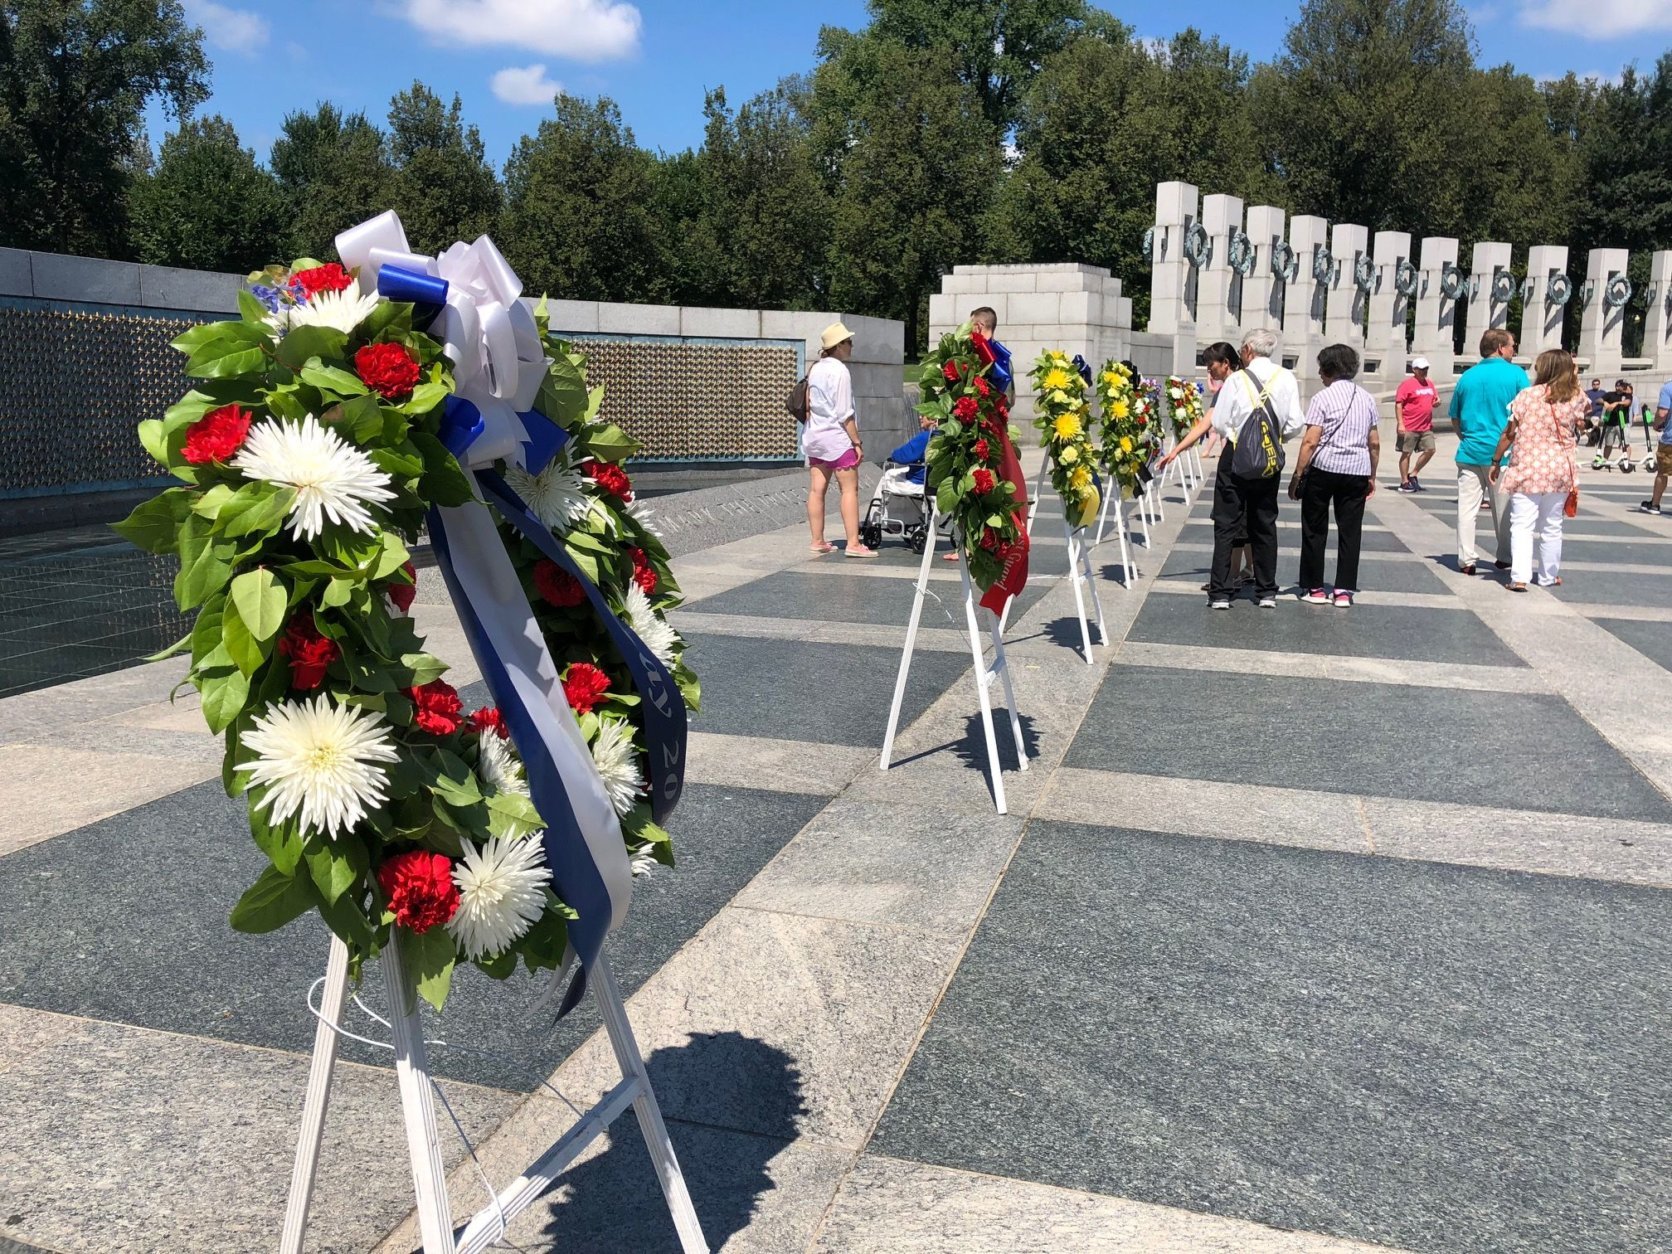 World War II veterans presented commemorative wreaths at the National World War II Memorial to honor the 73rd anniversary of V-J Day. (WTOP/Keara Dowd)